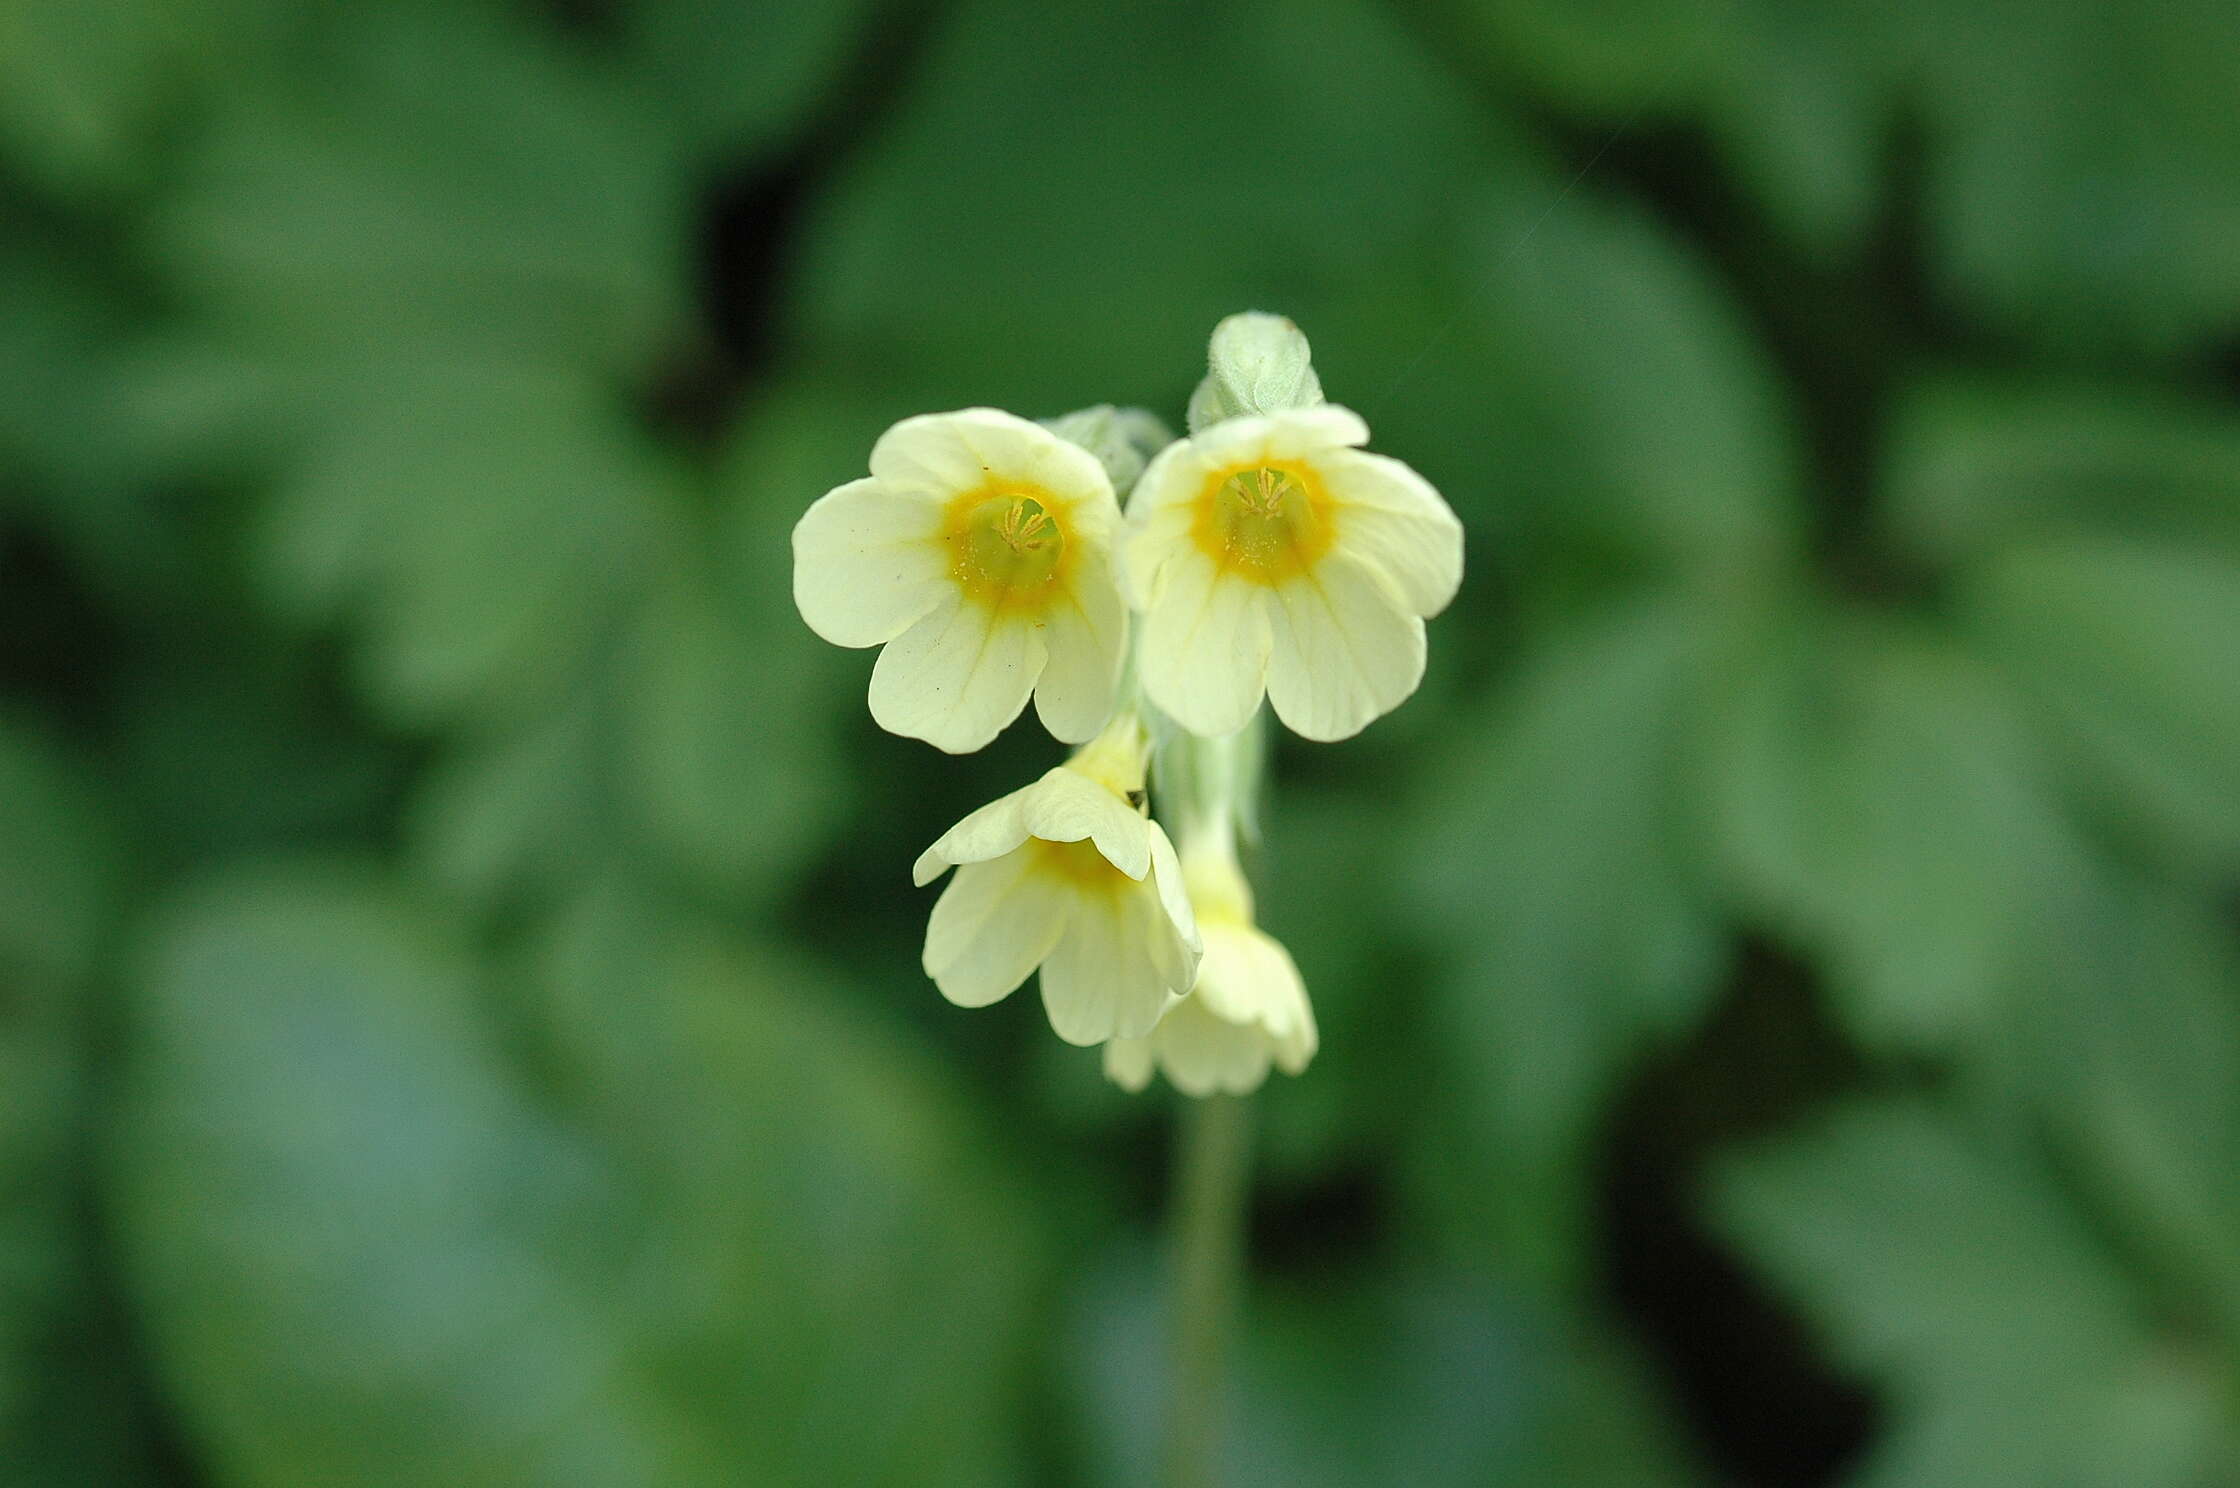 Image of cowslip